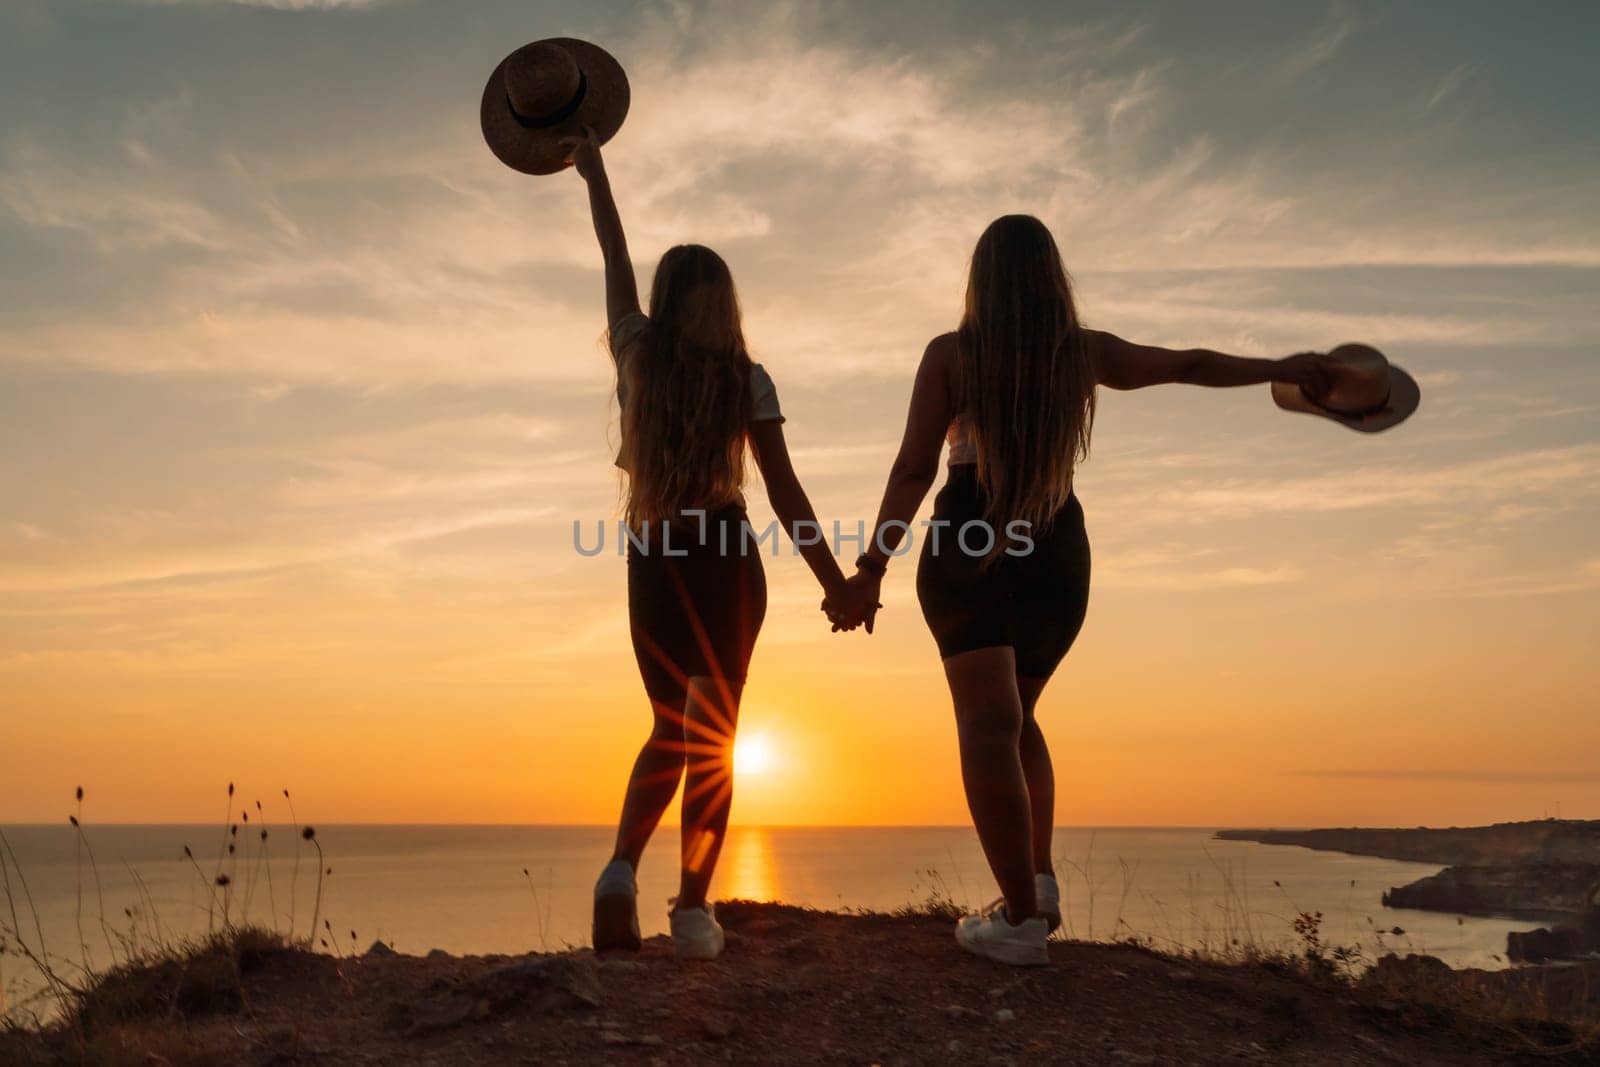 Two women are standing on a hillside, holding hands and wearing hats. The sun is setting in the background, creating a warm and peaceful atmosphere